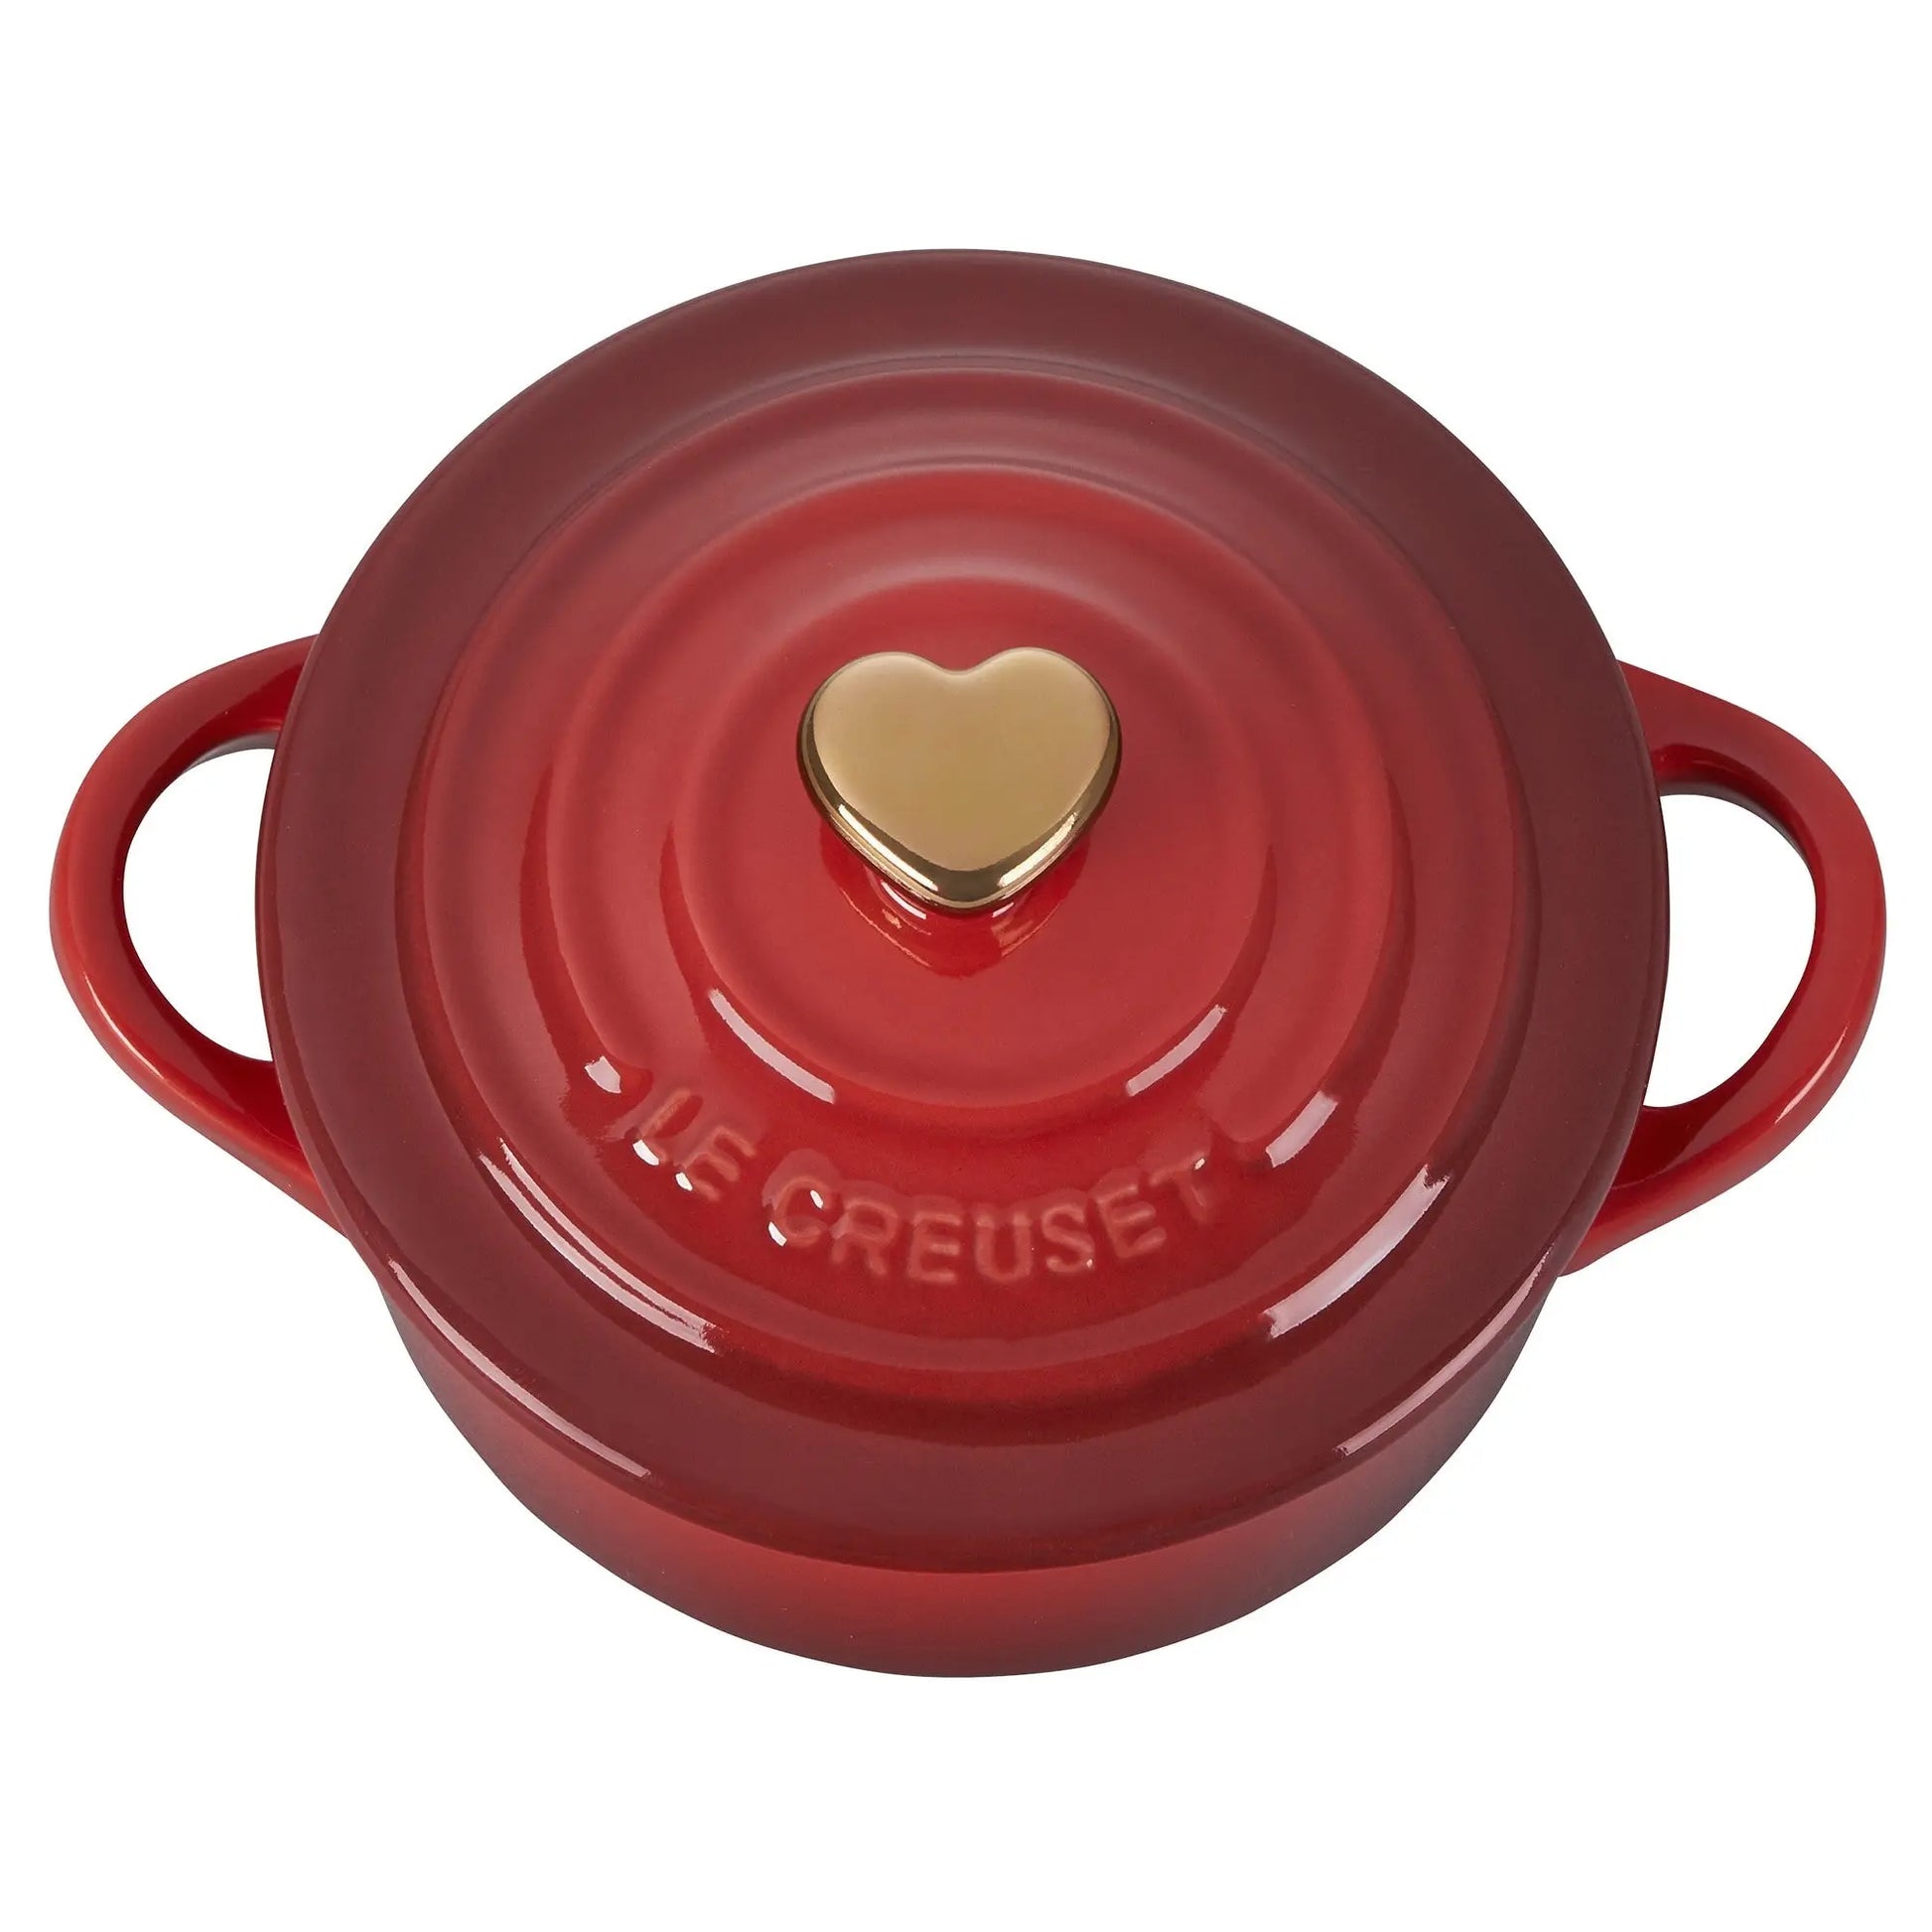 Creuset Round Cocotte with Knob - Browns Kitchen